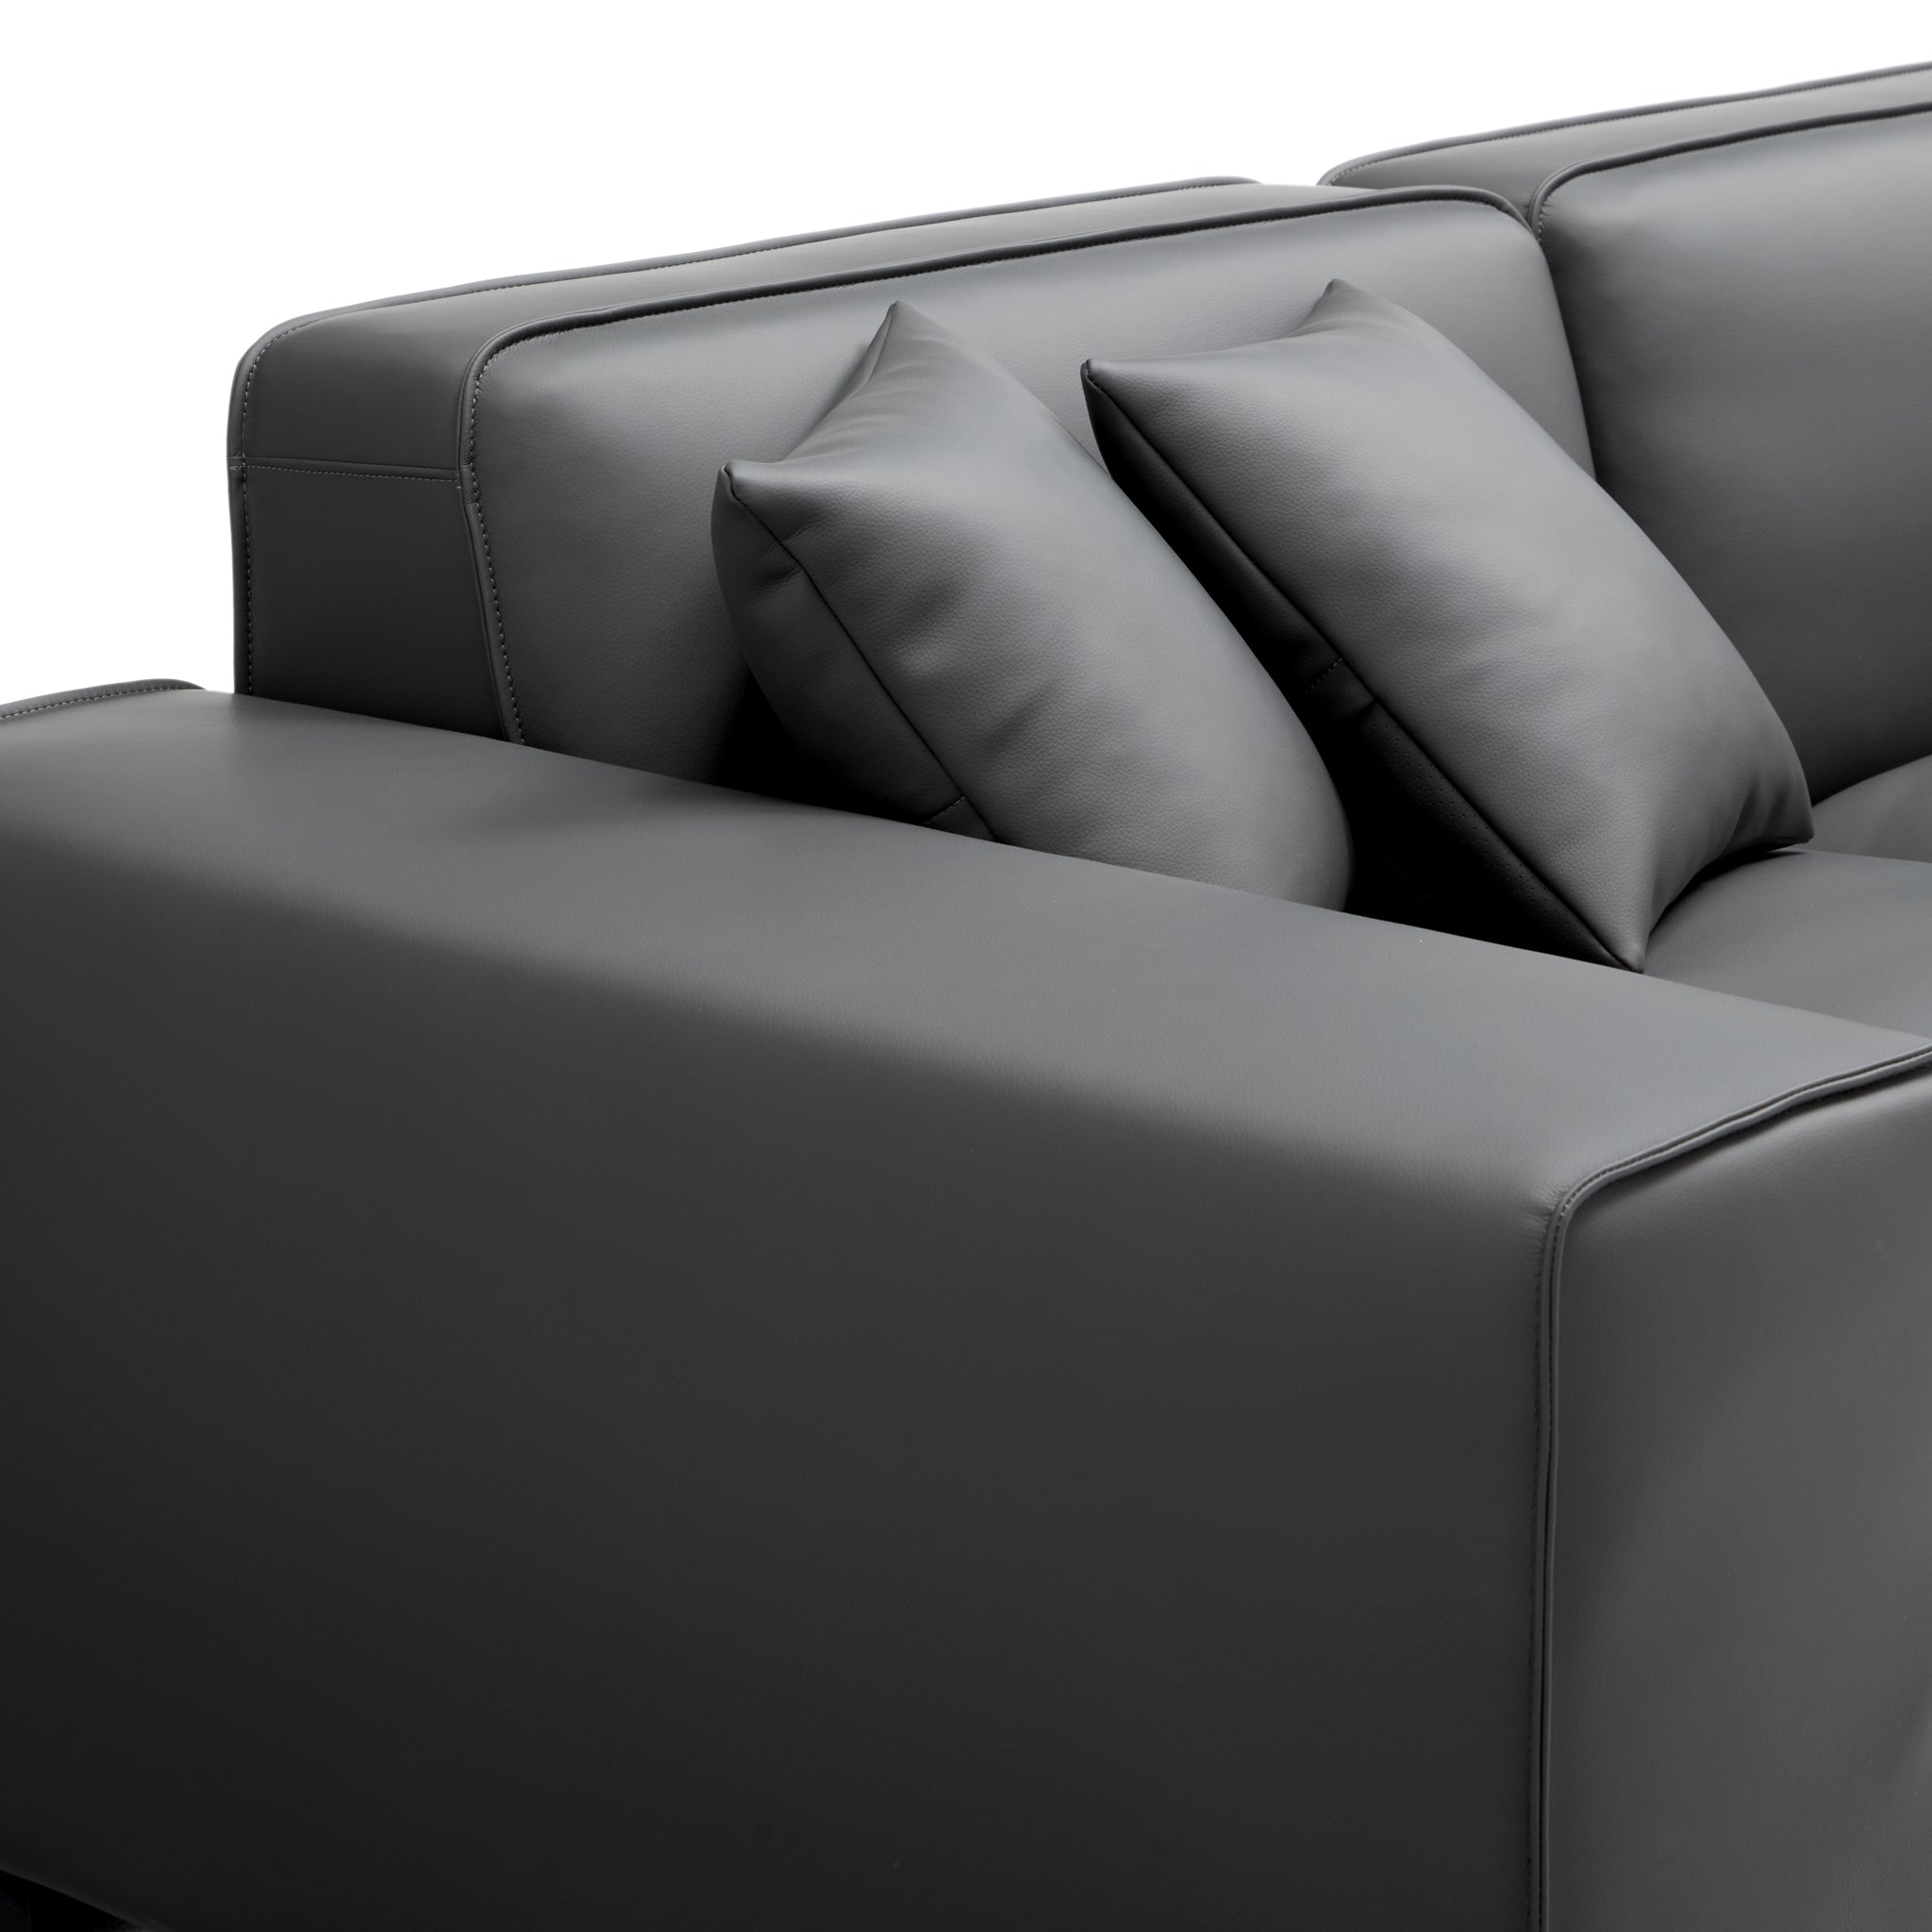 Domus Modular Dark Gray Leather L-Shaped Sectional